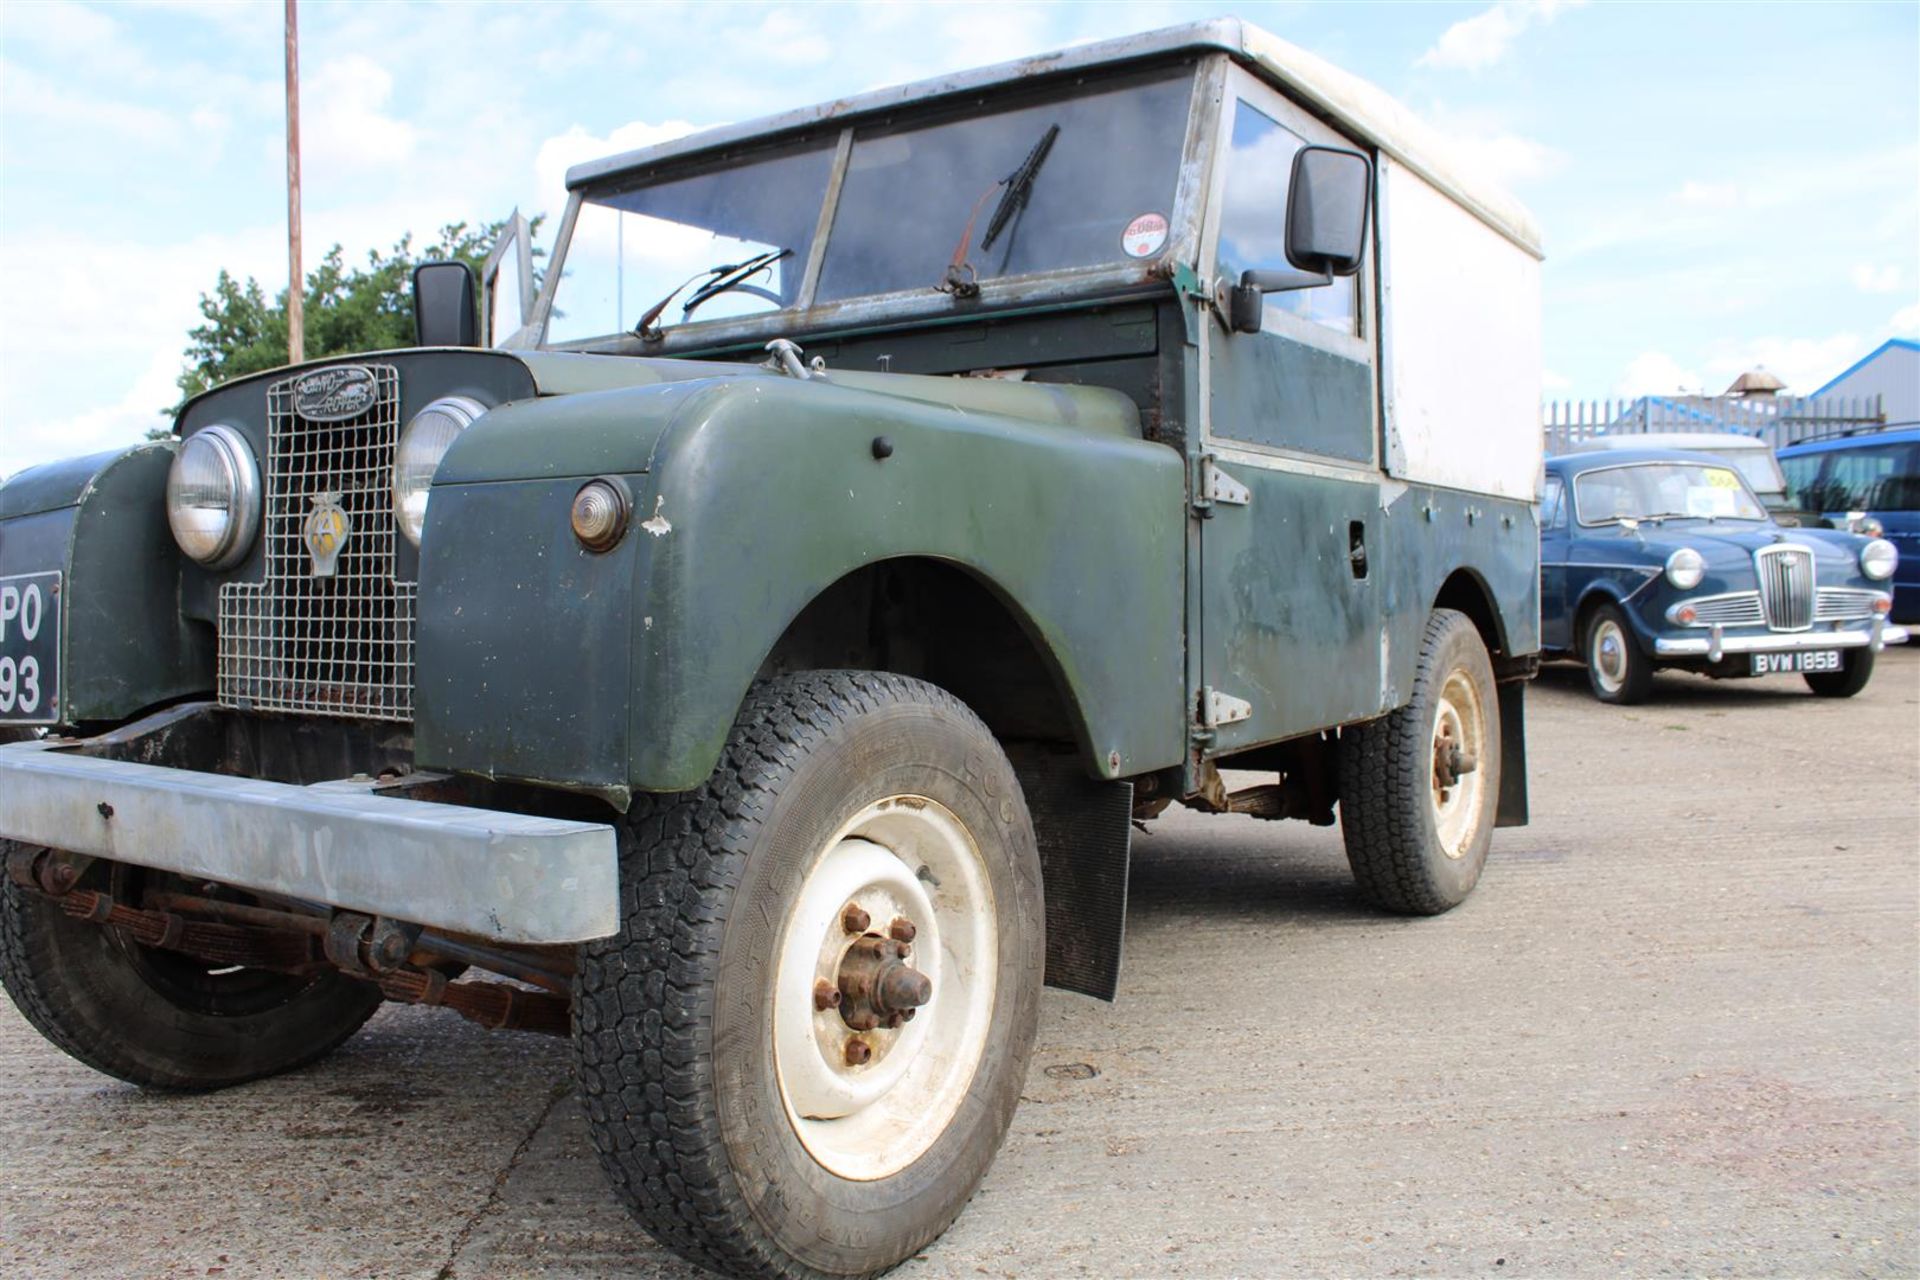 1957 Land Rover 88 Series I" - Image 16 of 26